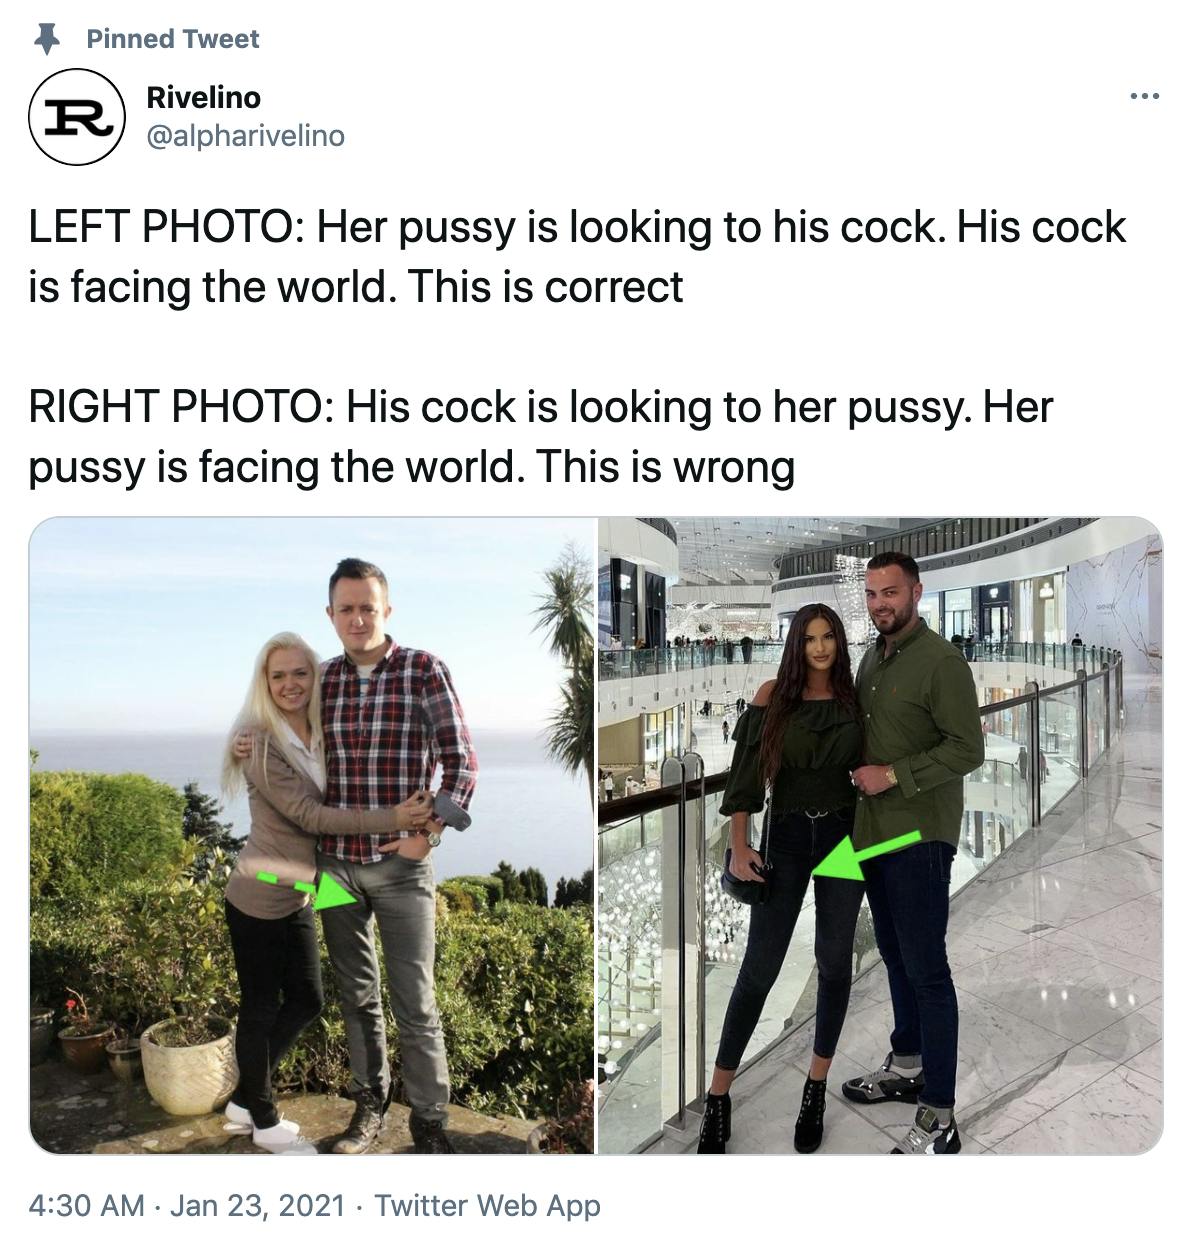 'LEFT PHOTO: Her pussy is looking to his cock. His cock is facing the world. This is correct RIGHT PHOTO: His cock is looking to her pussy. Her pussy is facing the world. This is wrong' Two pictures, on the left a blonde woman hugs the side of a man in a plaid shirt, on the right a dark haired woman in black faces the camera while a man hugs her side